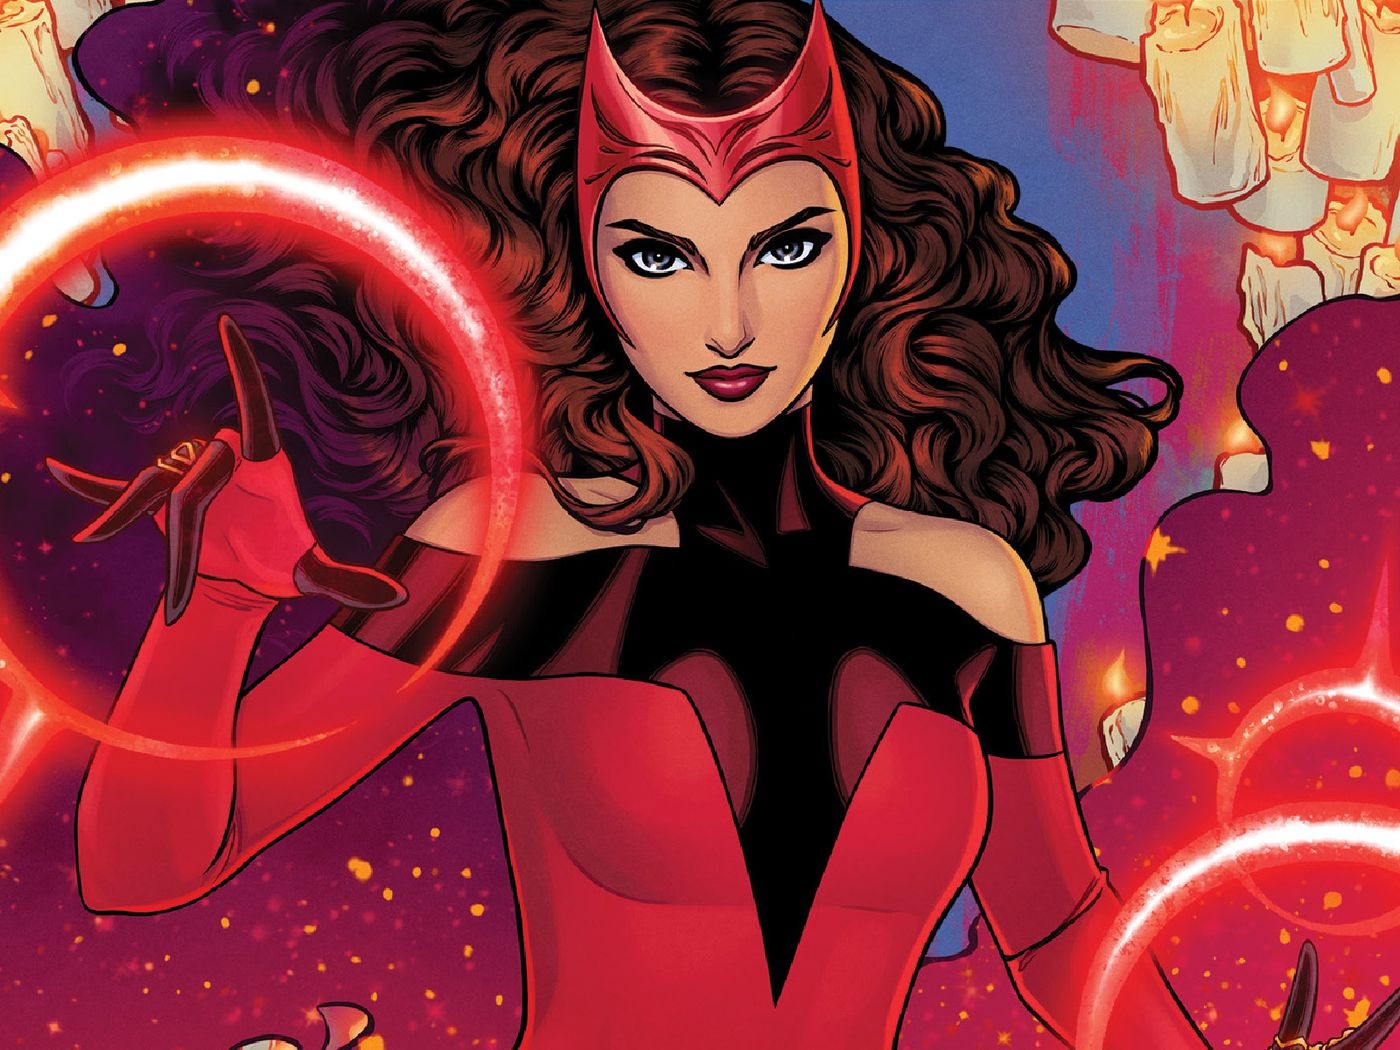 Scarlet Witch in the comics